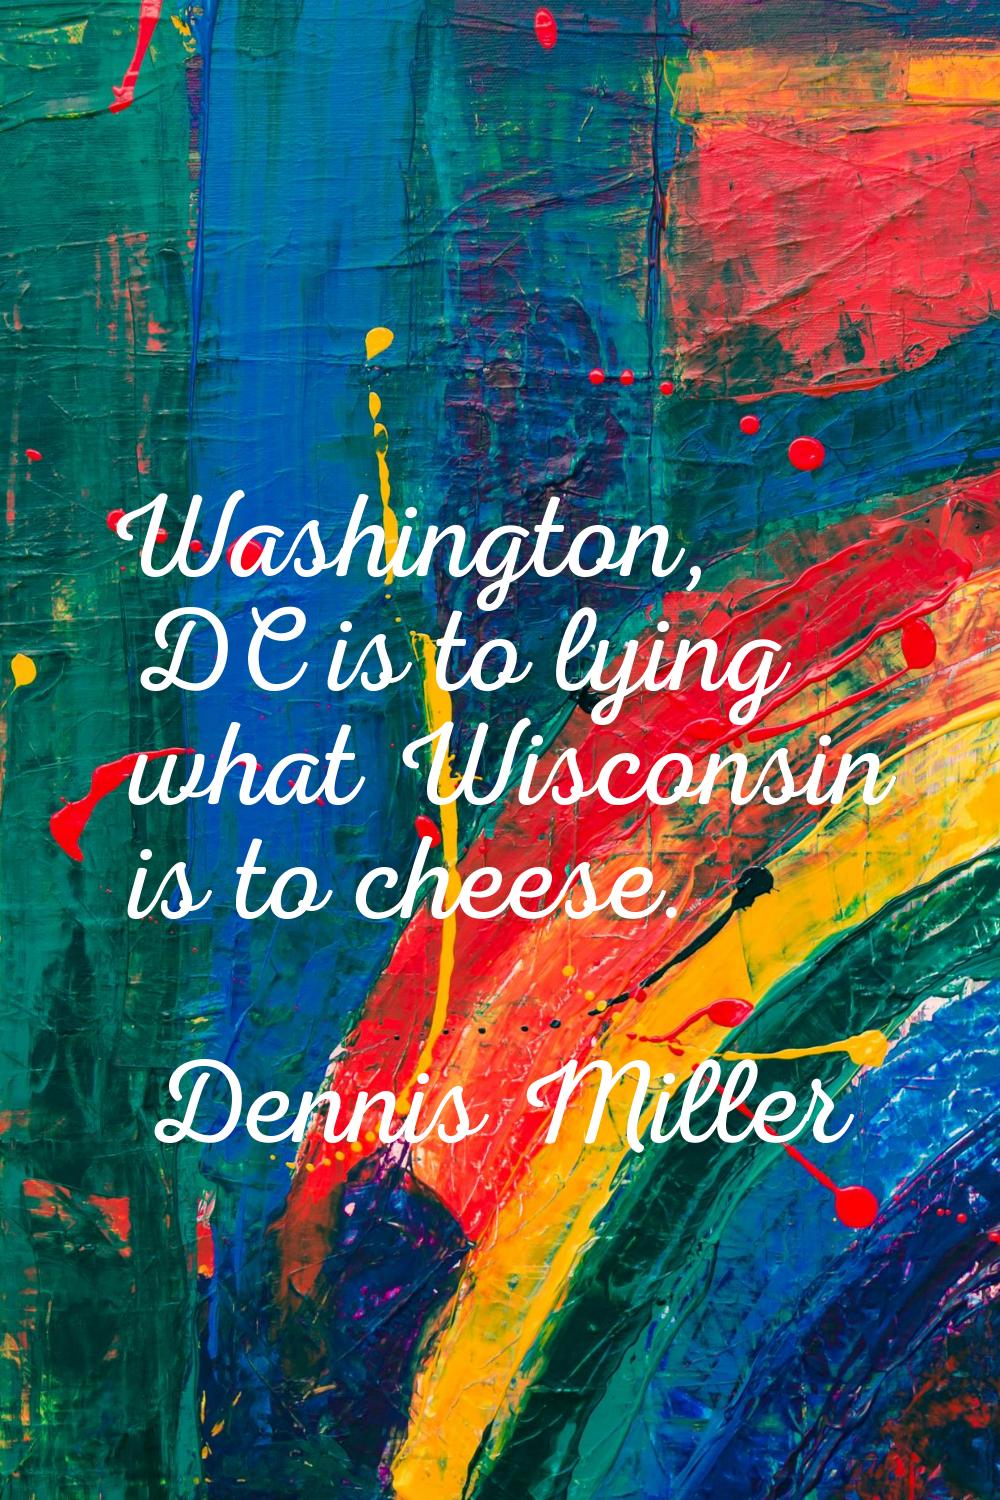 Washington, DC is to lying what Wisconsin is to cheese.